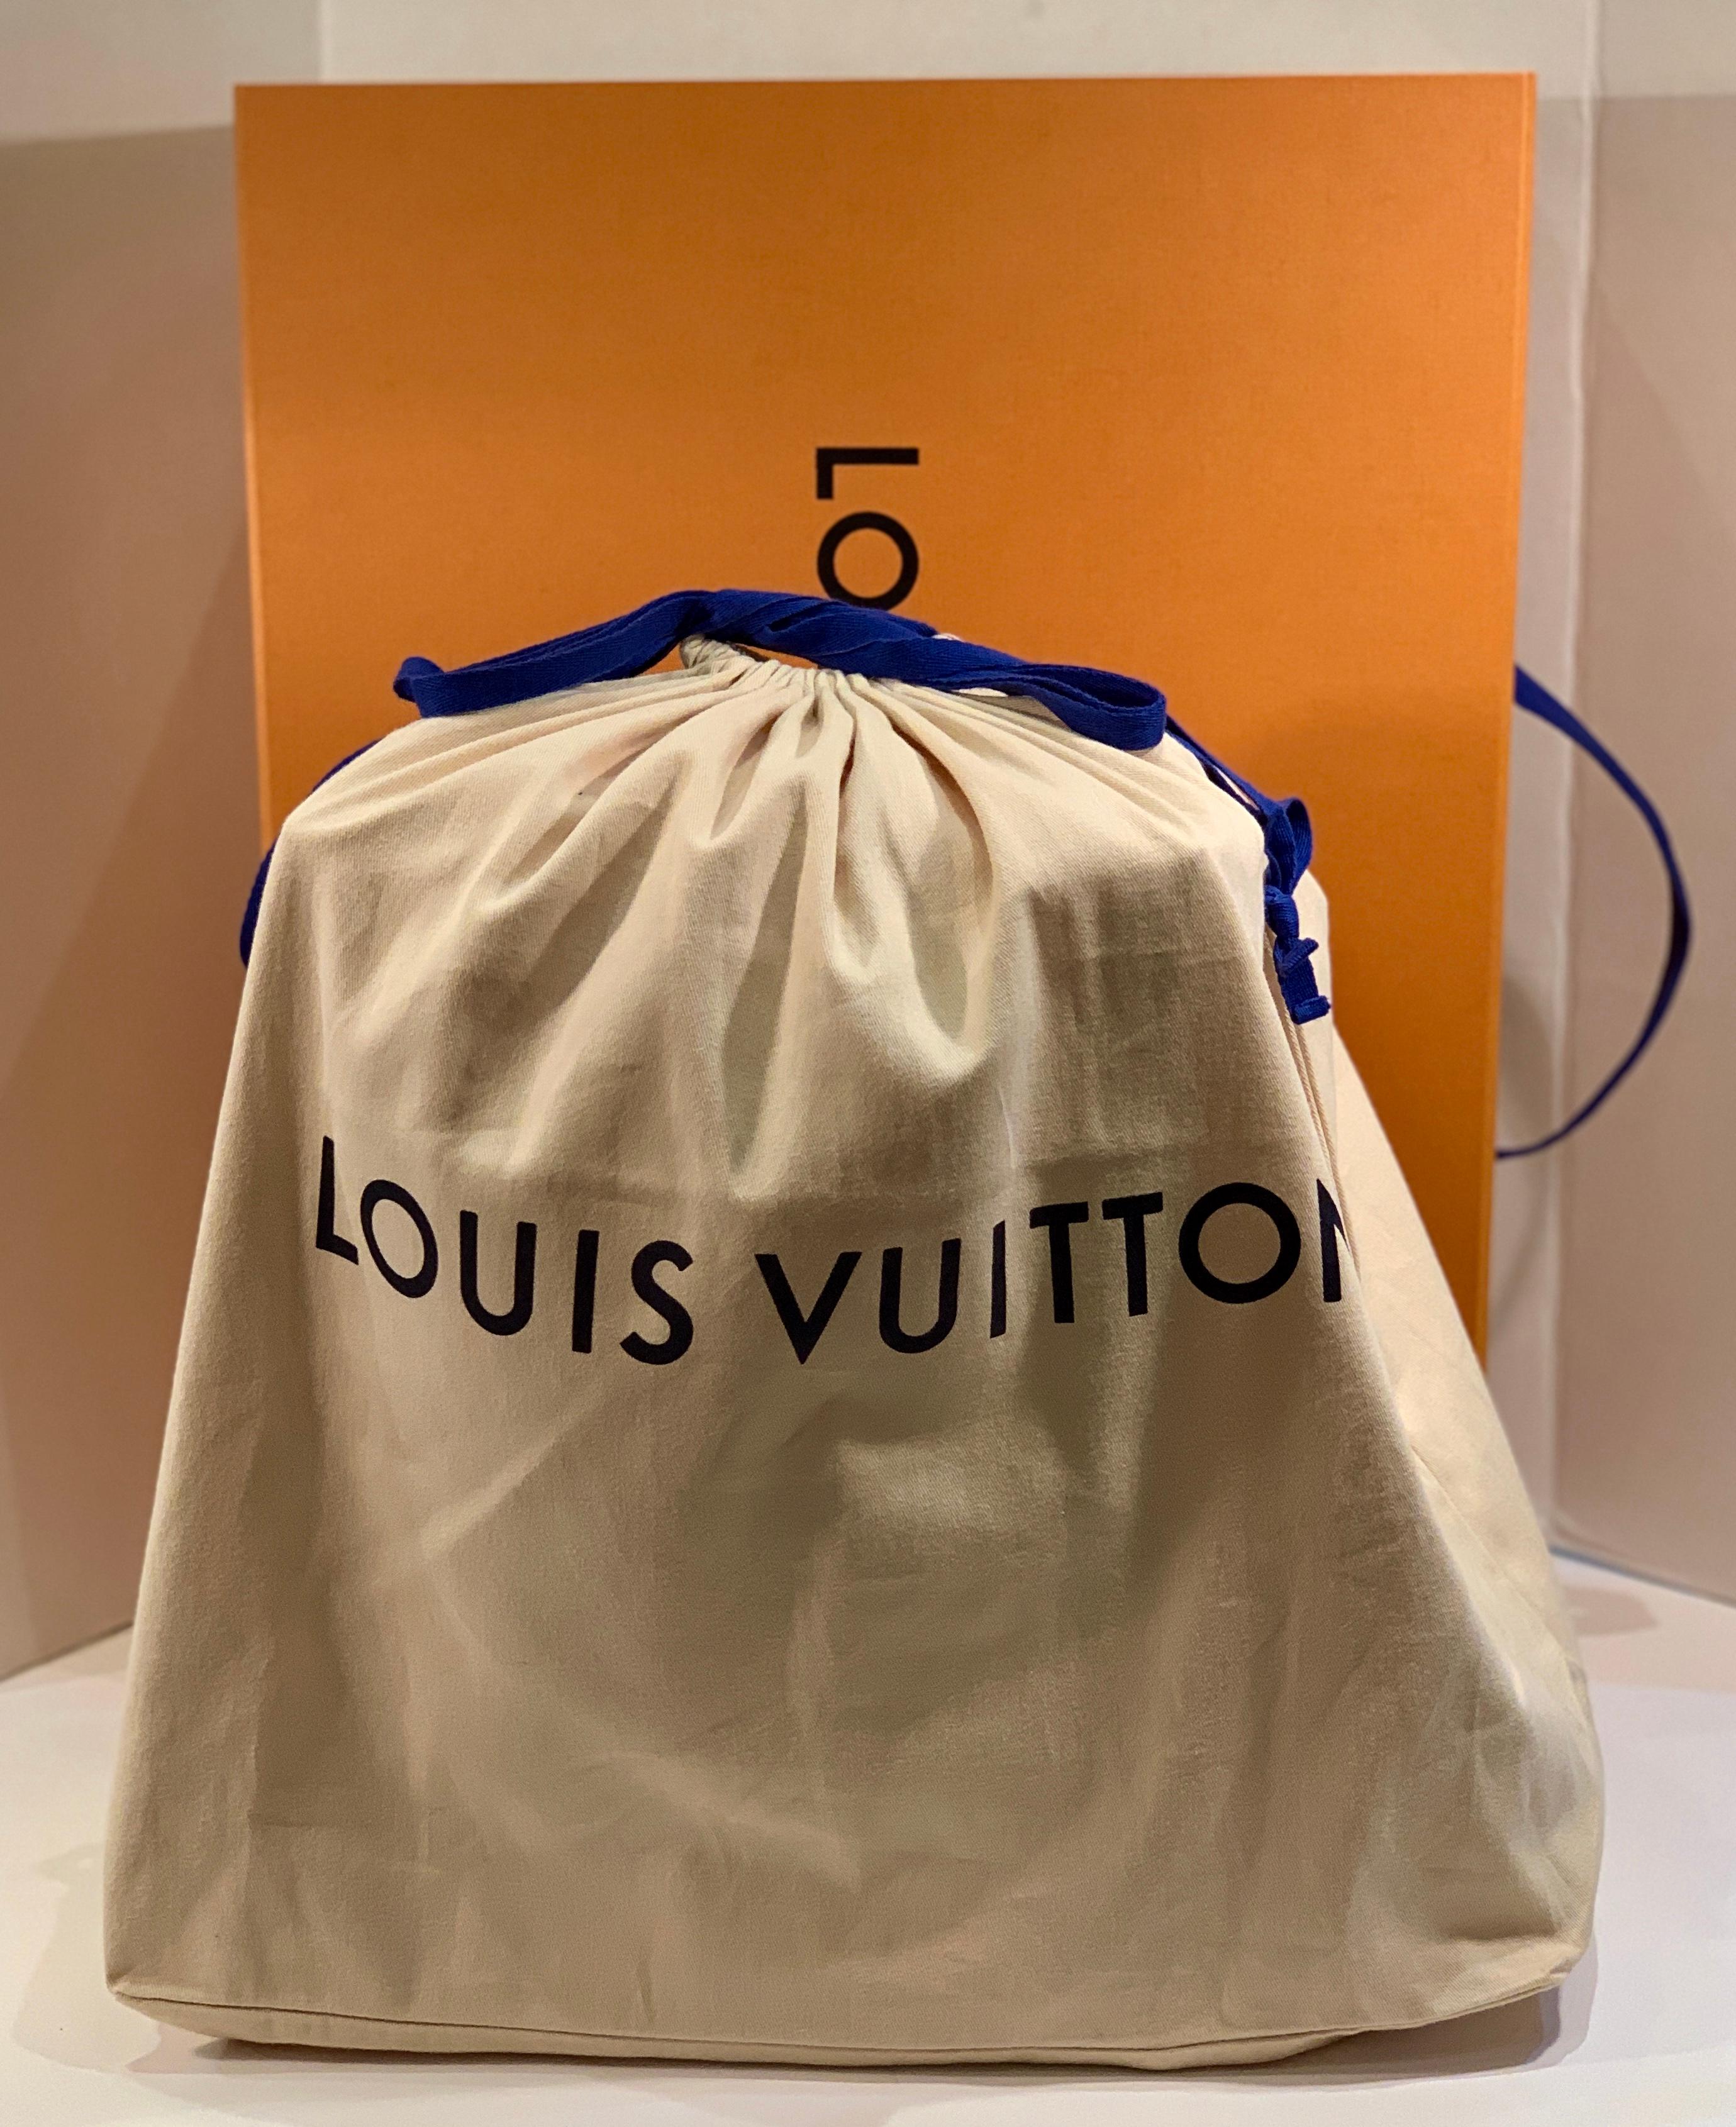 SOLD OUT Louis Vuitton Virgil Abloh Figures of Speech Orange Soft Trunk Backpack 11